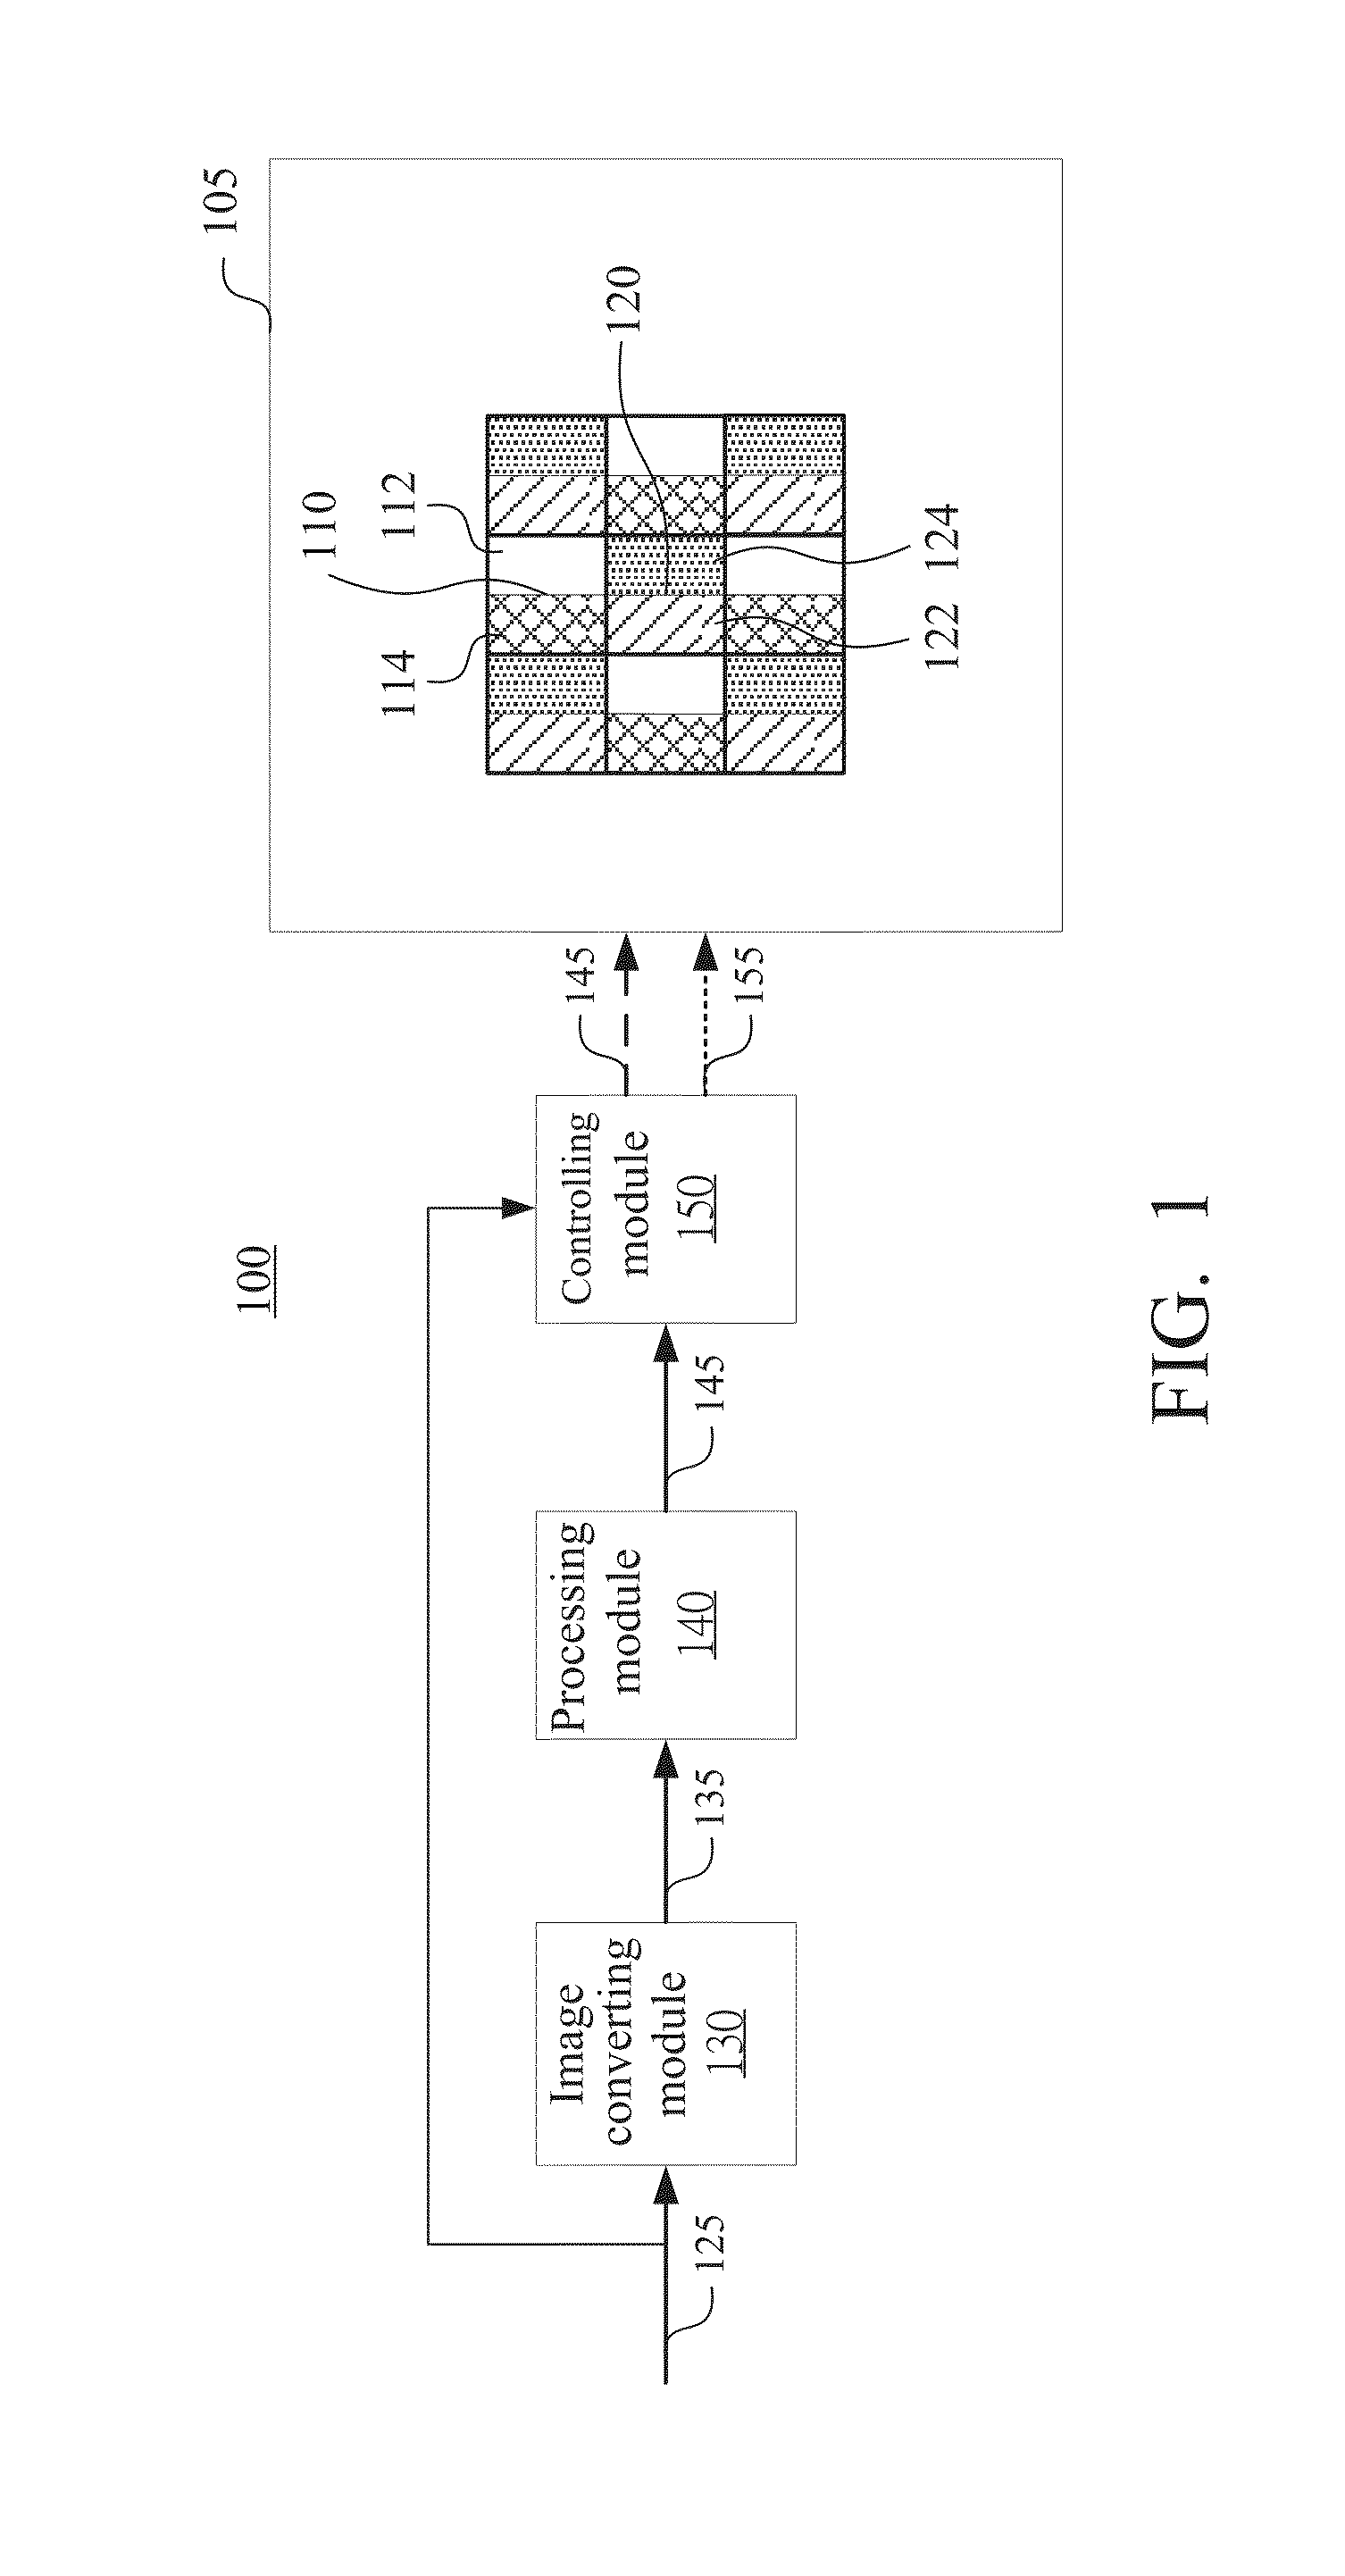 Displaying method and display with subpixel rendering